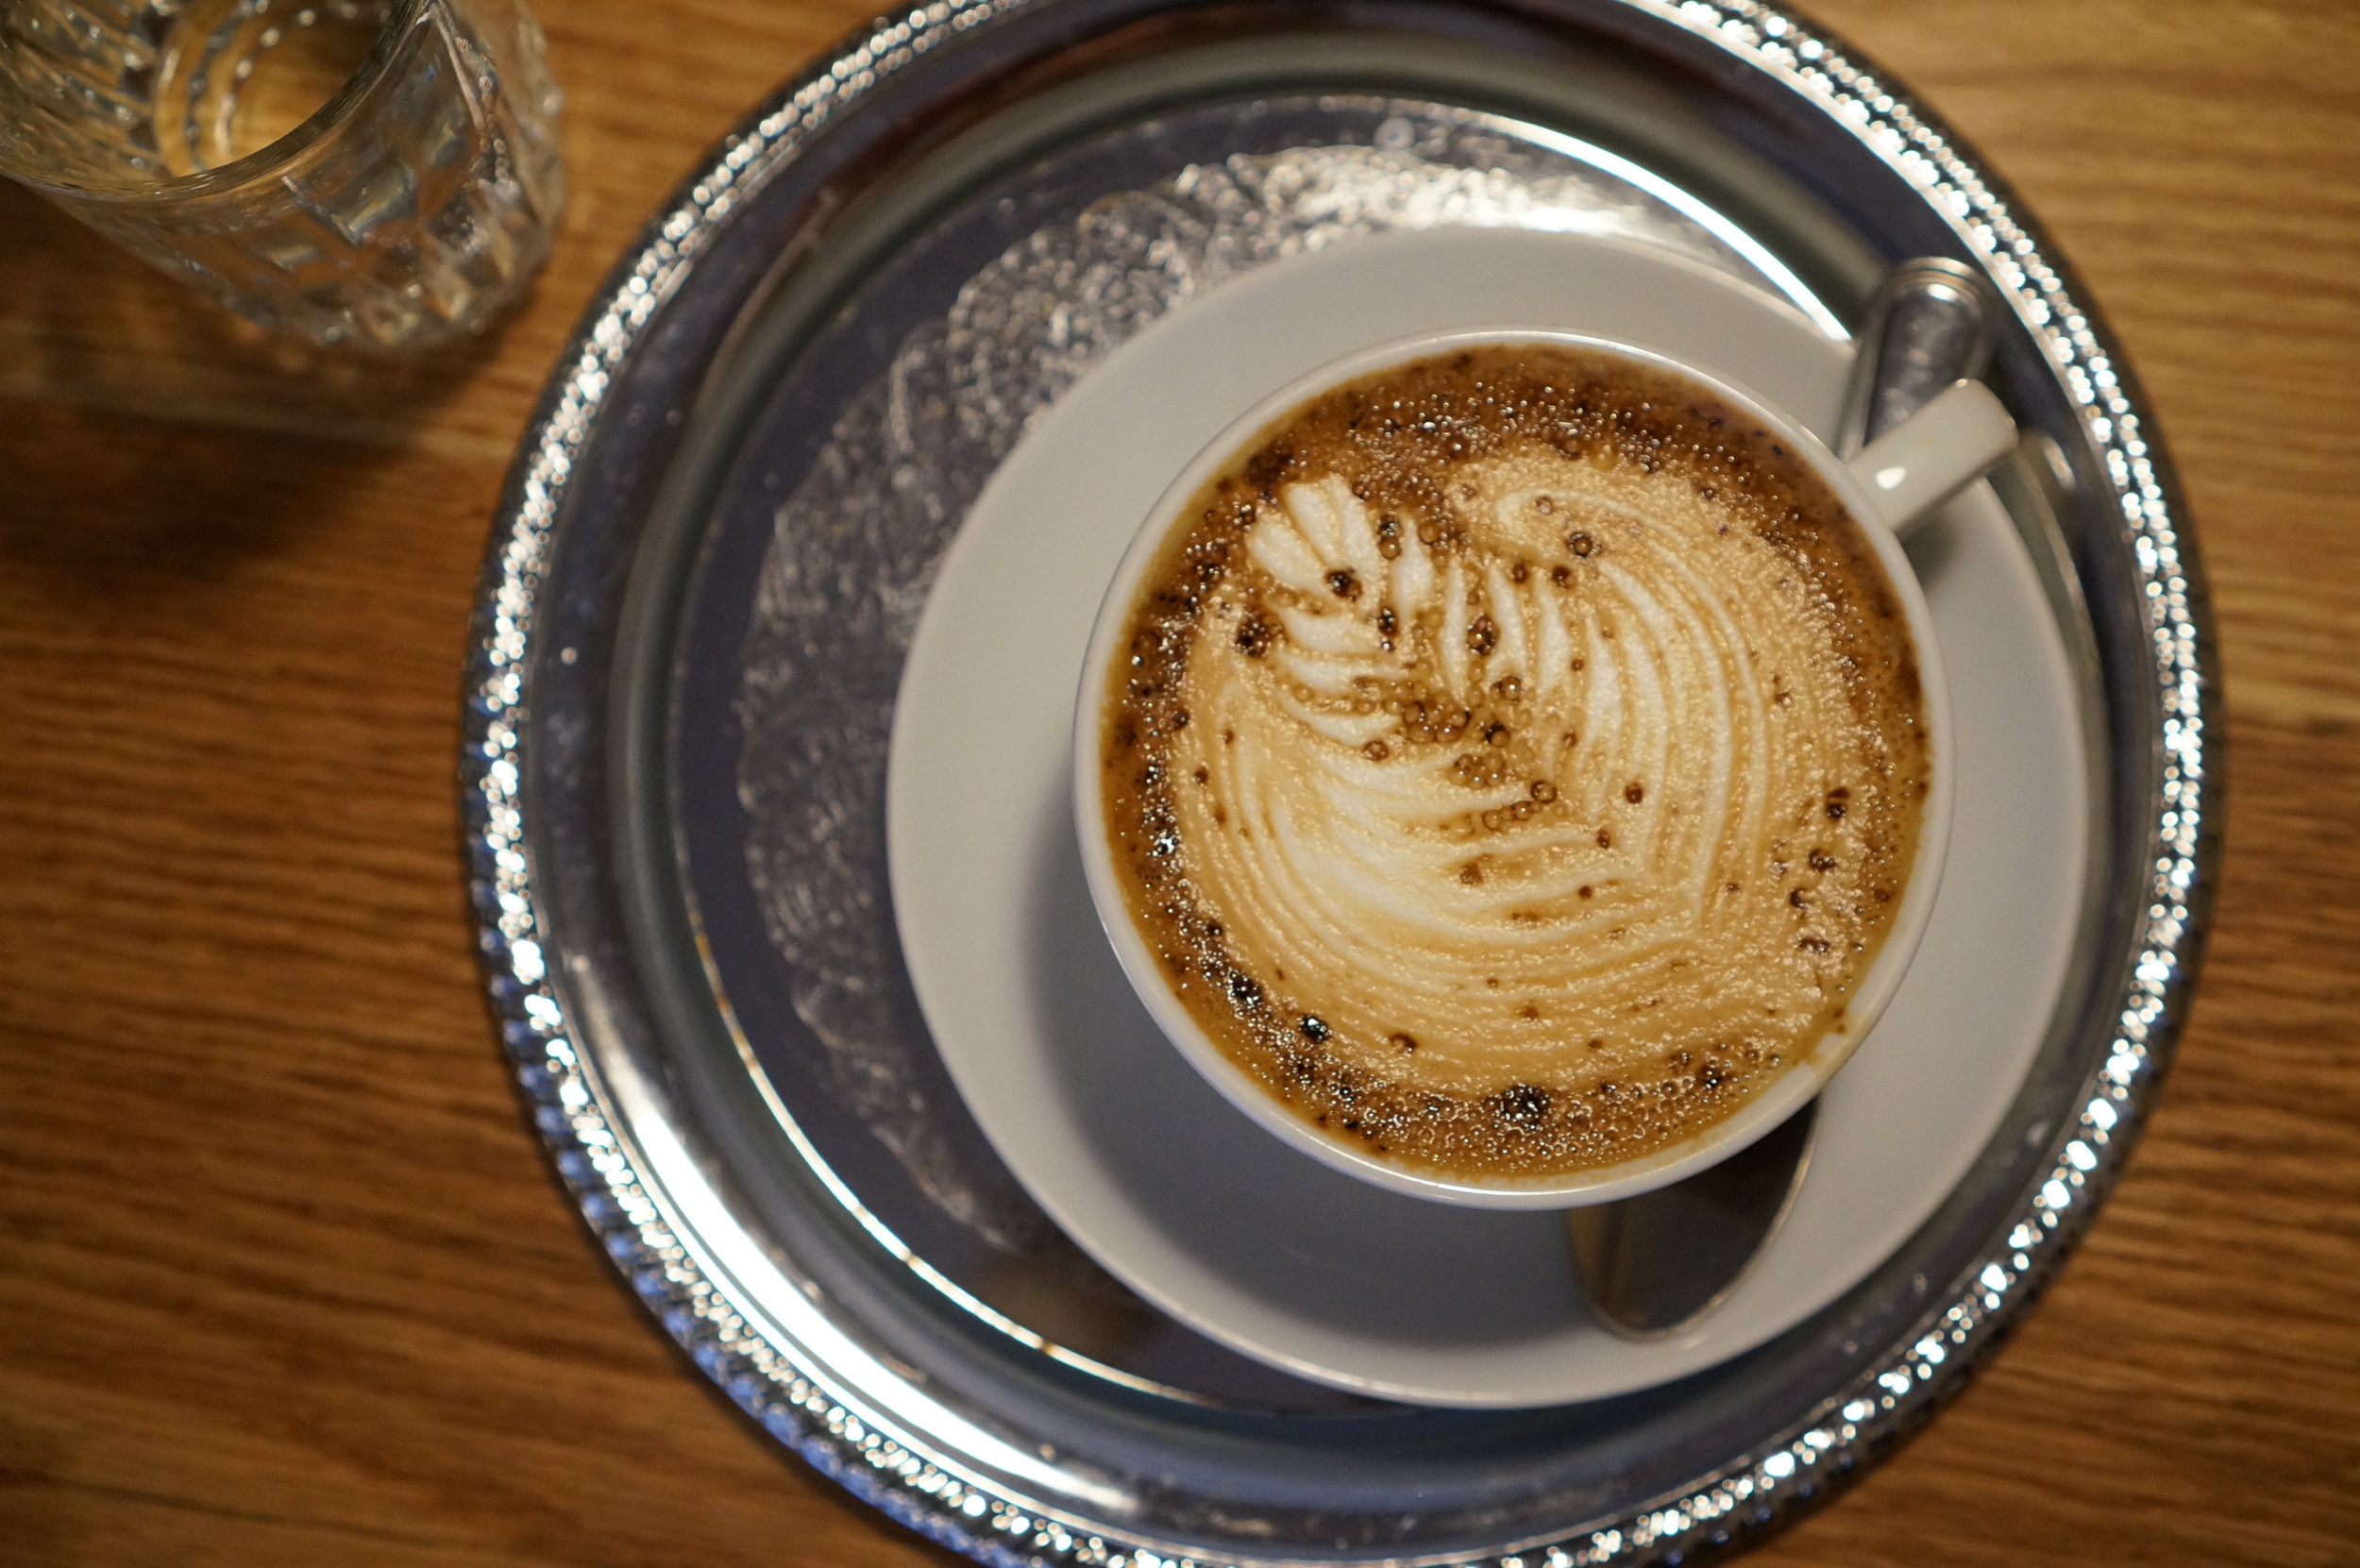 Scandinavia in New York: $10 Lattes and Nordic Design at Budin